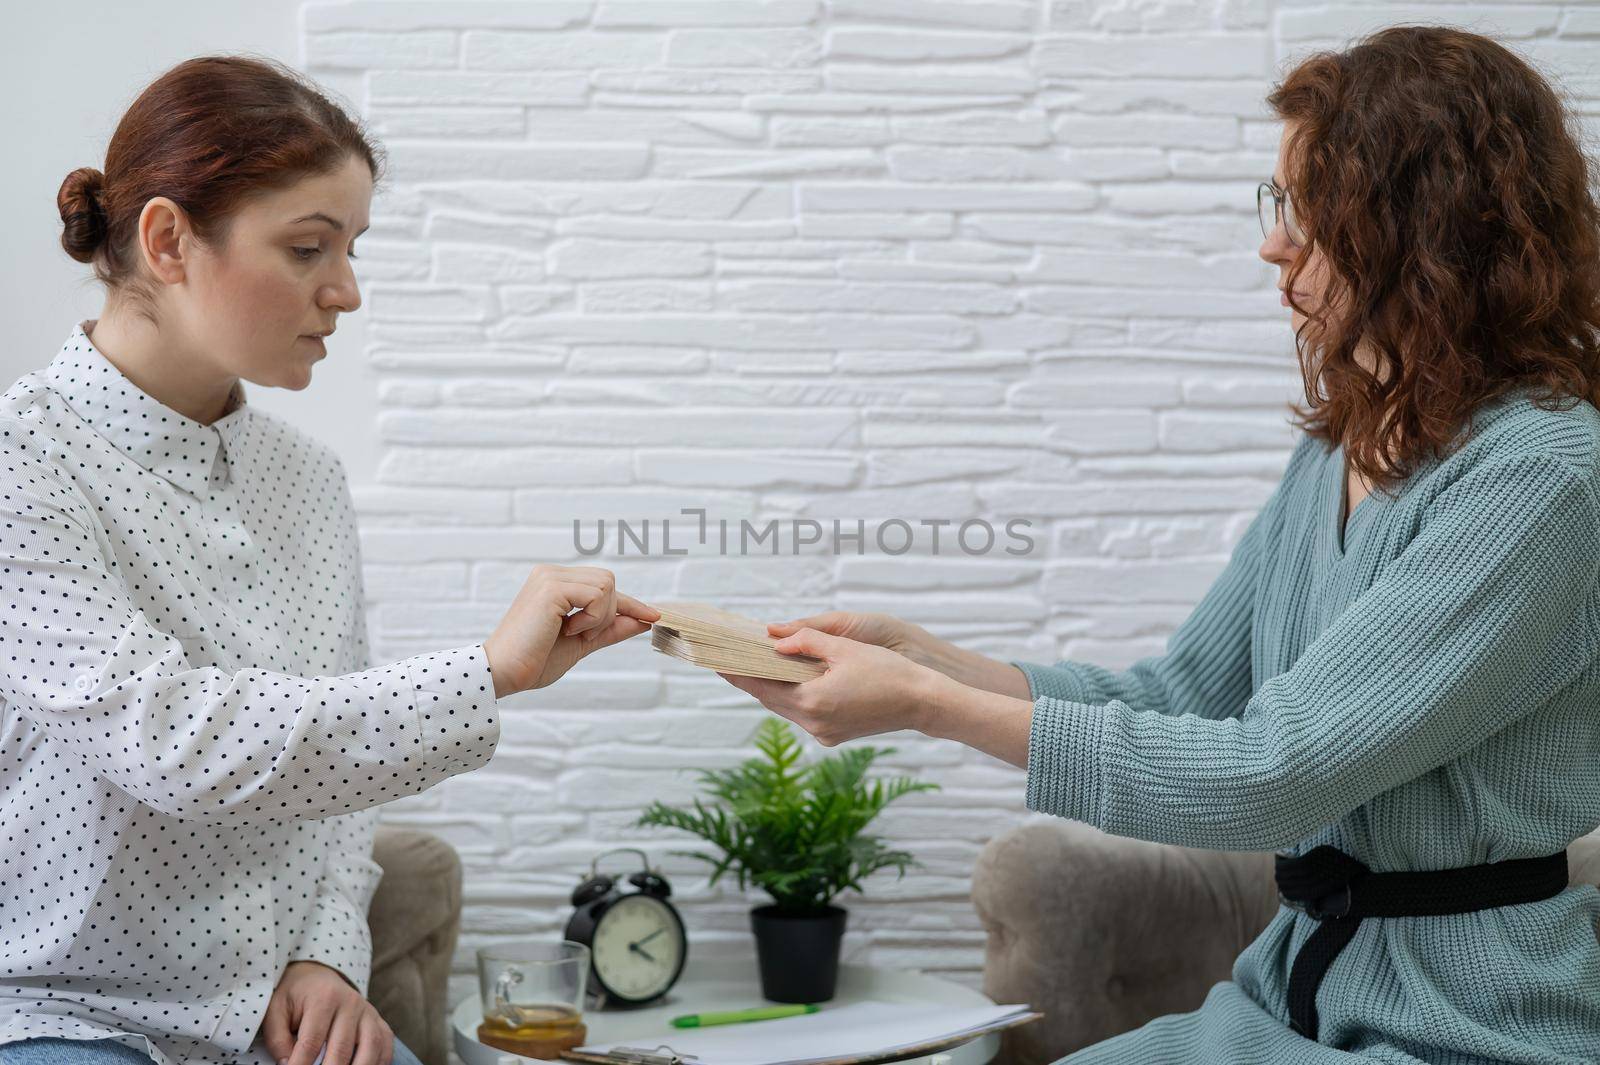 Psychologist uses metaphorical associative cards in a session with a patient